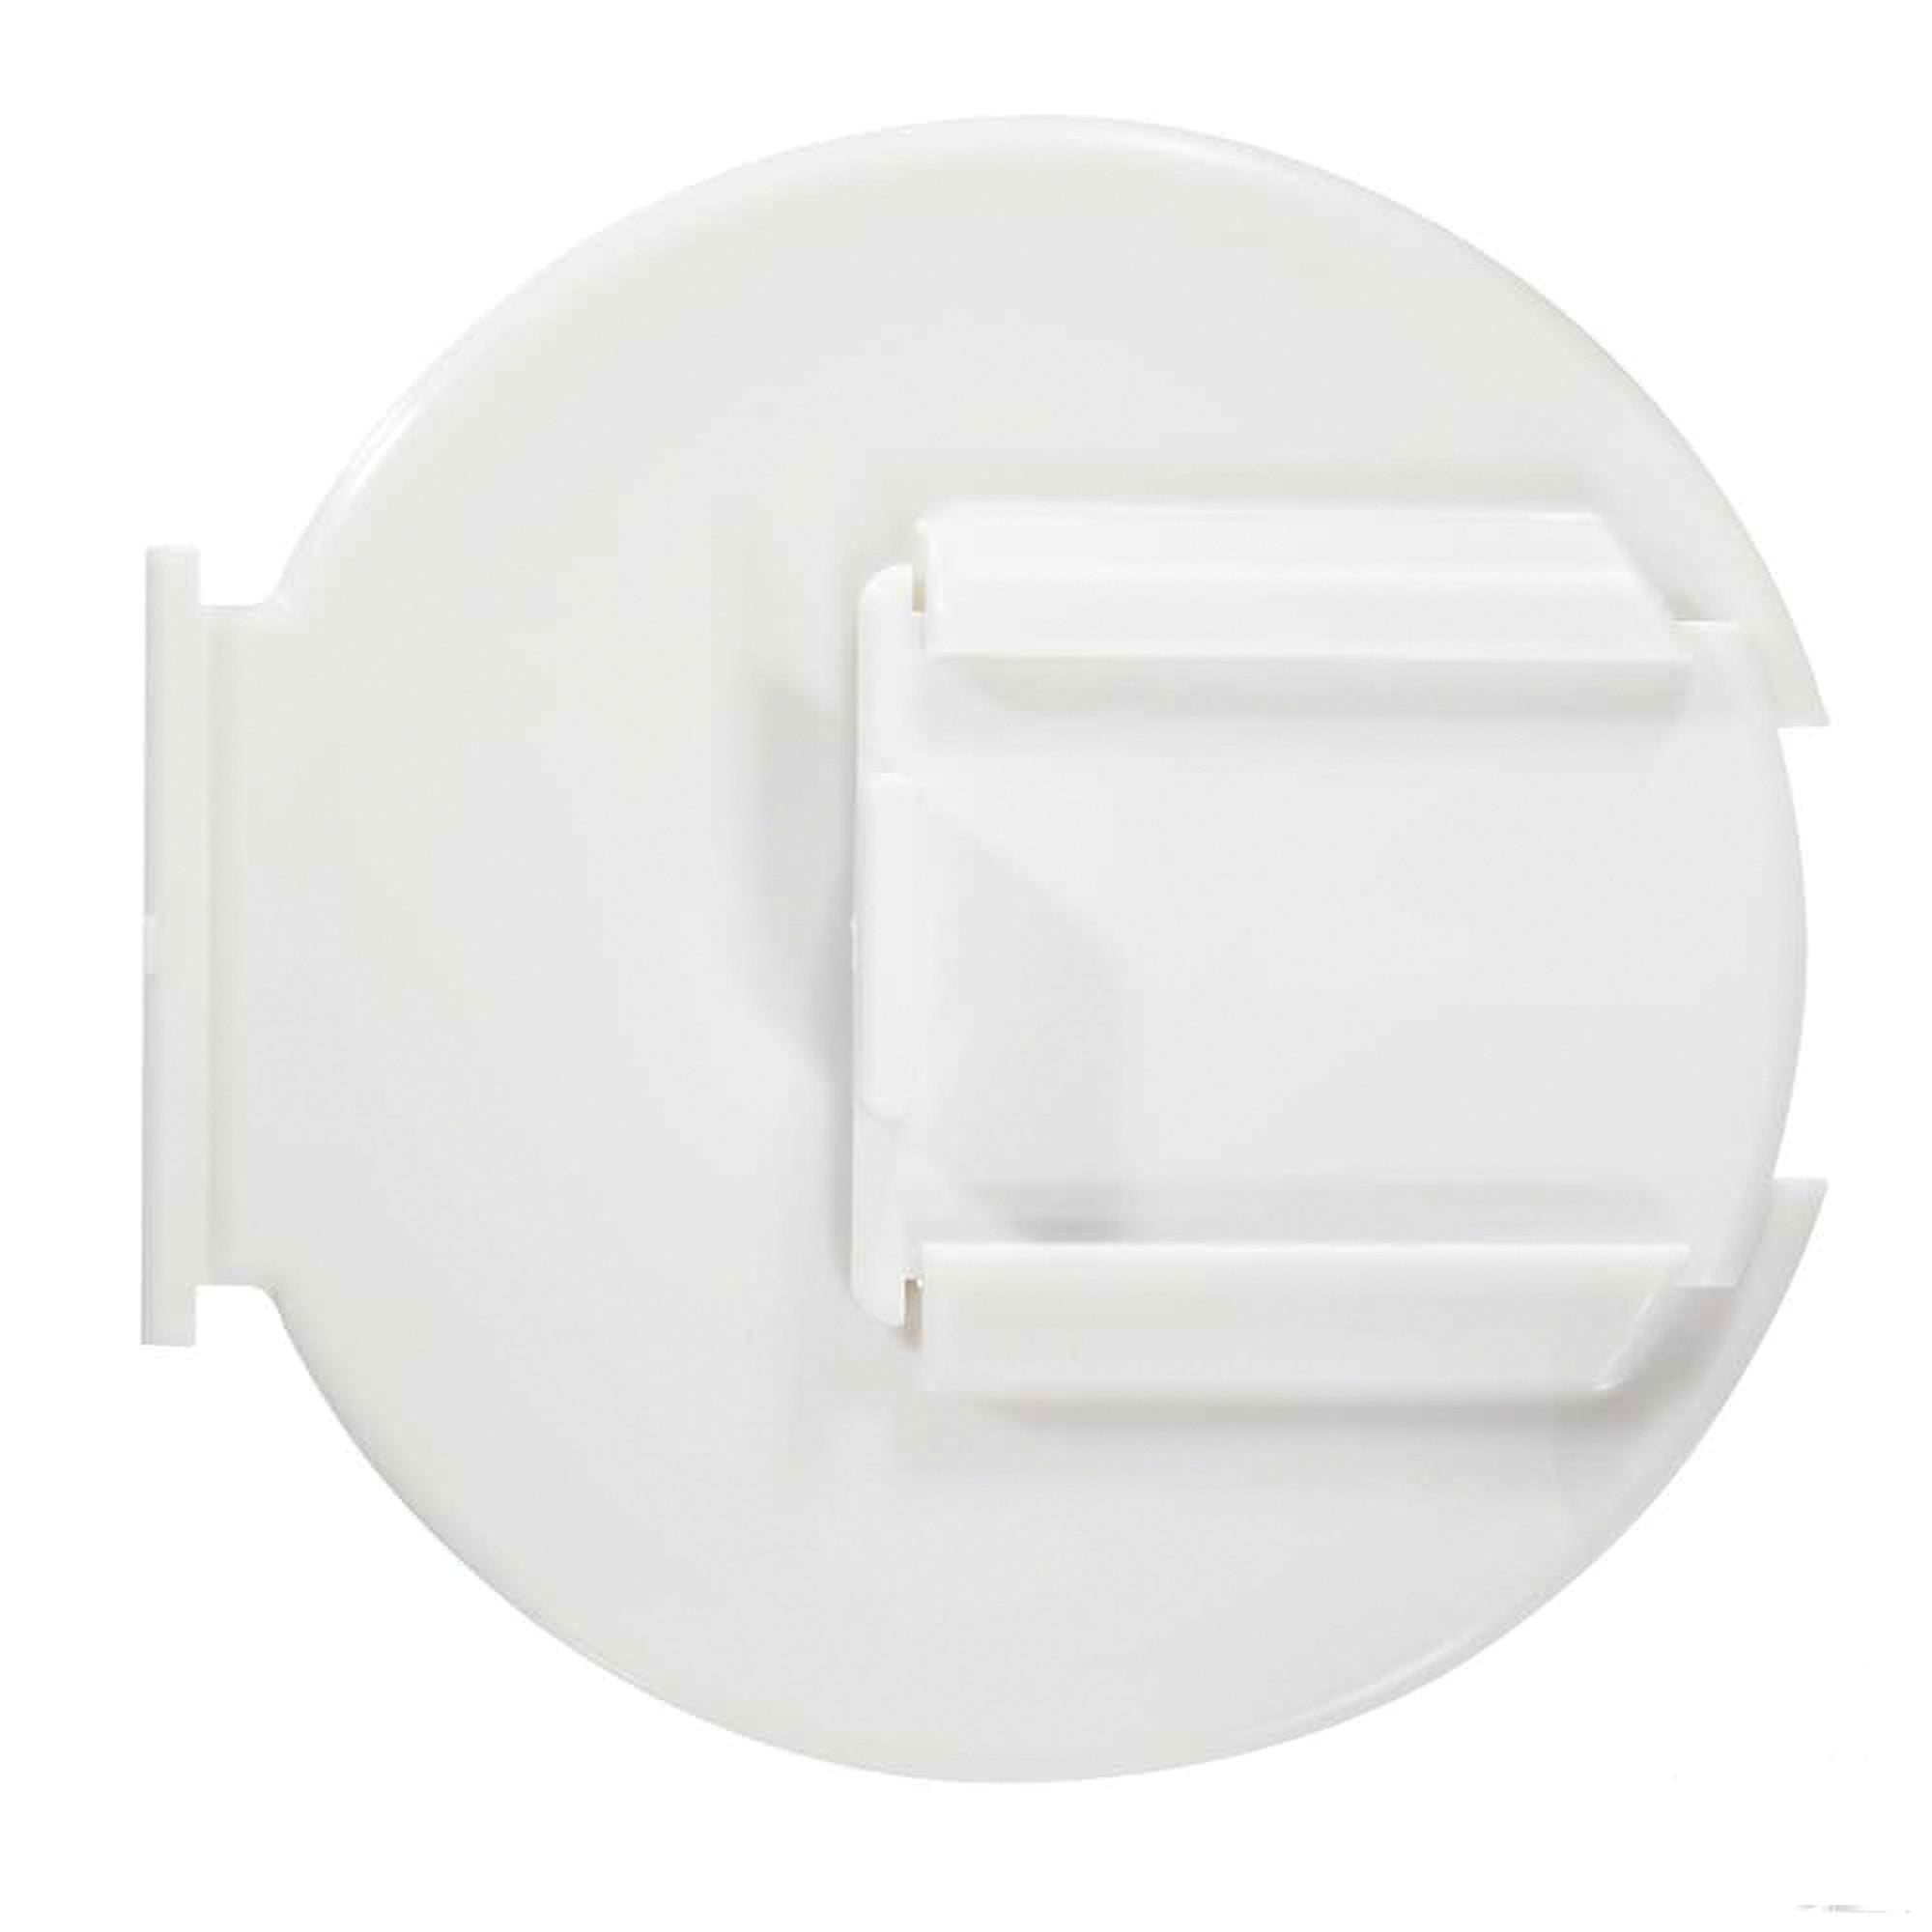 RV Designer LIDKIT300 Replacement Polar and Colonial White Lid Kit - For Low Profile Cable Hatch